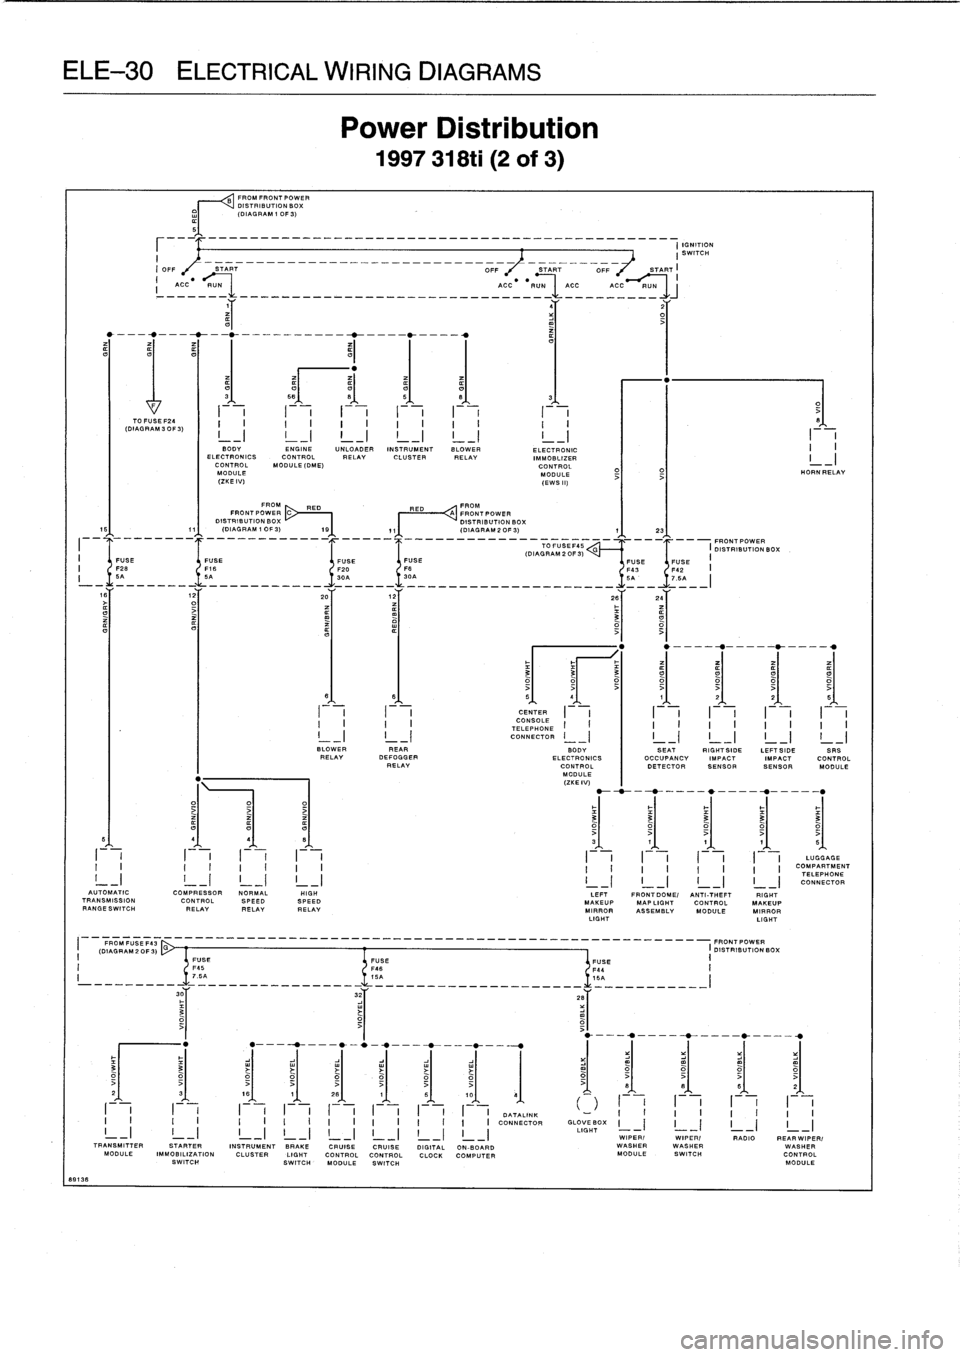 BMW 323i 1998 E36 Owners Guide 
ELE-30
ELECTRICAL
WIRING
DIAGRAMS

I
ACC
-R=_
____-____-______________
ACC
-
RUN

	

ACC
-_-C~

4Y

	

2Y

I

	

I

TO
FUSE
F24
(DIAGRAM
30F
3)

FROM
FRONT
POWER
DISTRIBUTION
BOX
(DIAGRAM
1
0F3)
IGNI